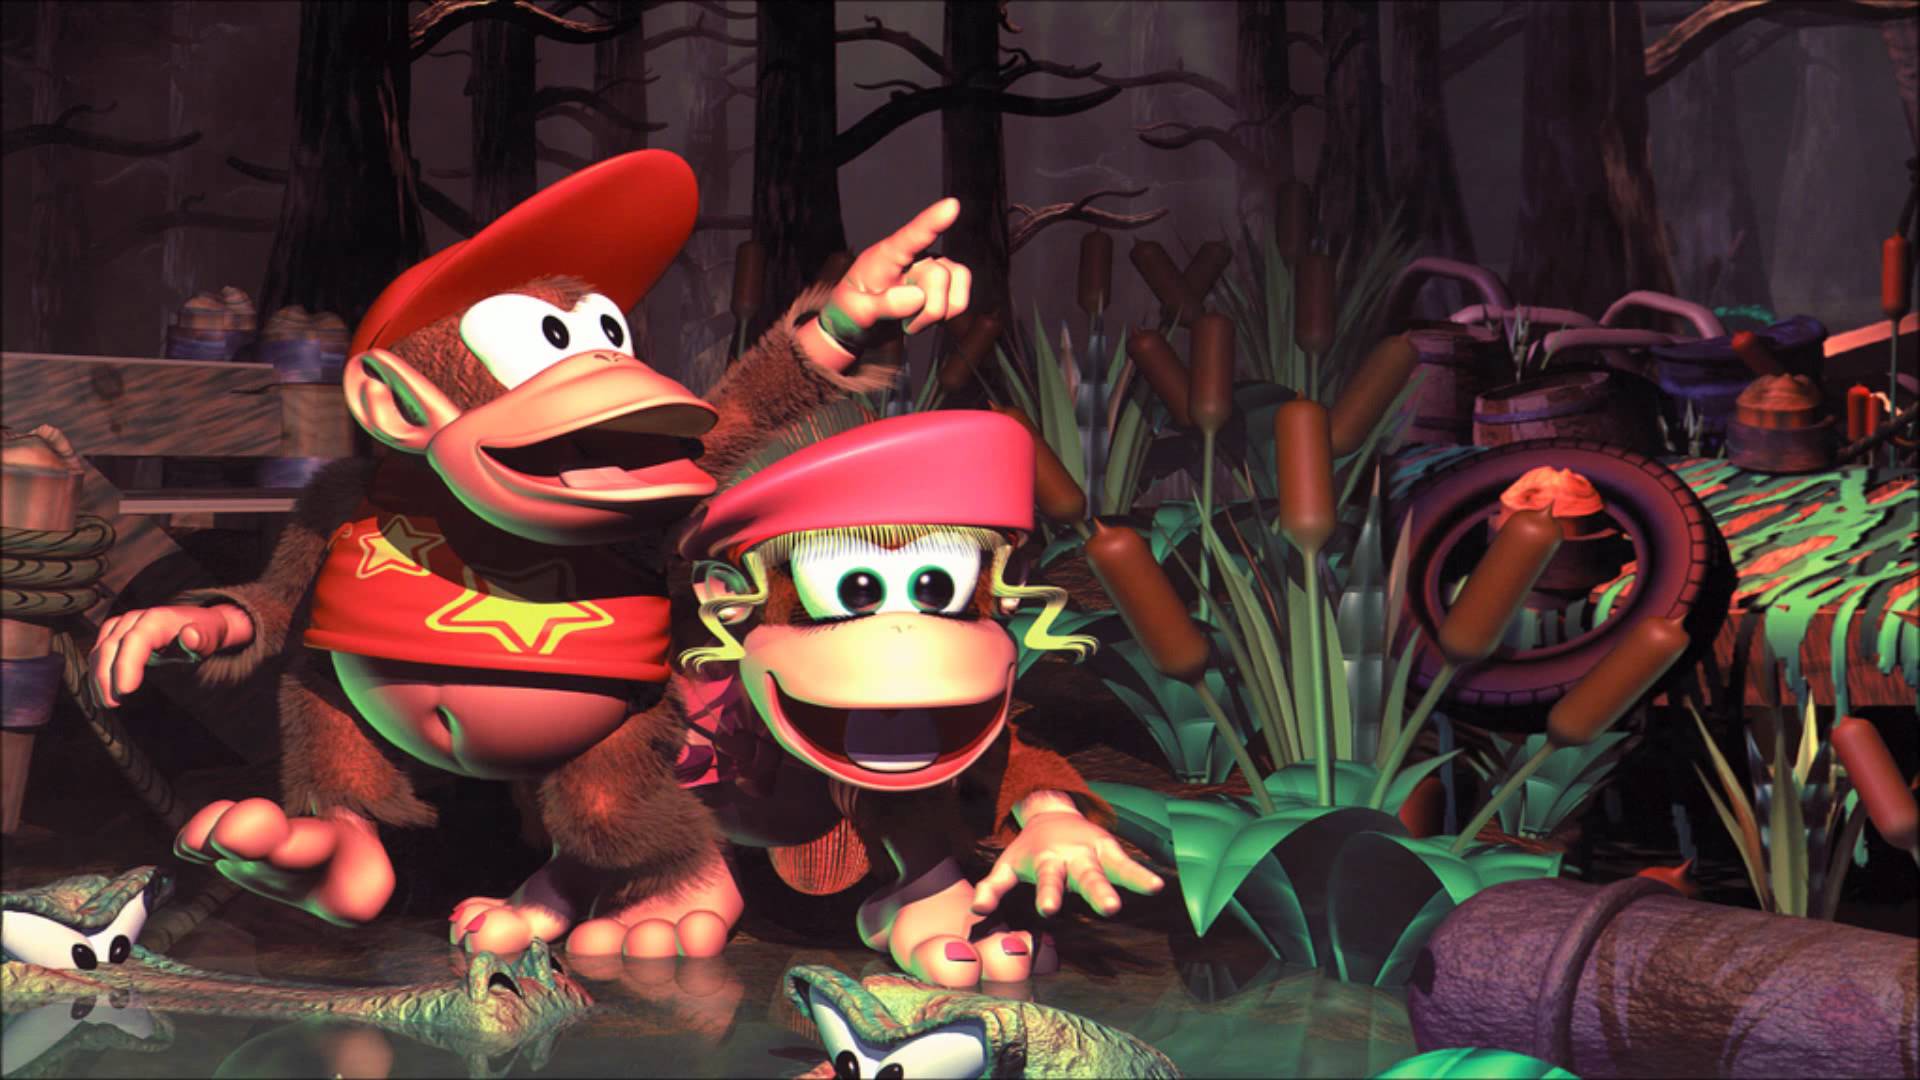 donkey kong country 2 controls